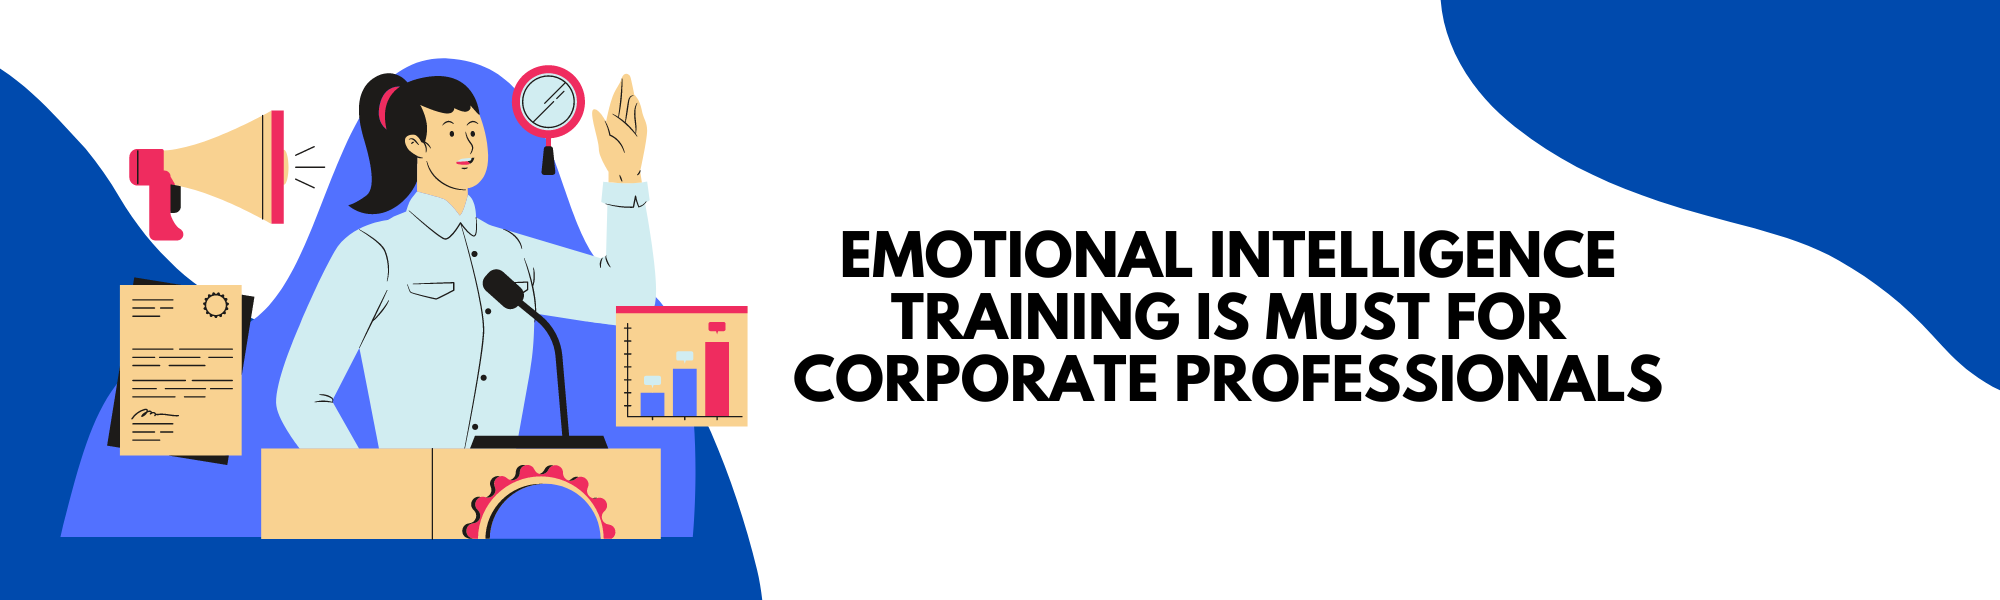 Emotional Intelligence Training is Must for Corporate Professionals